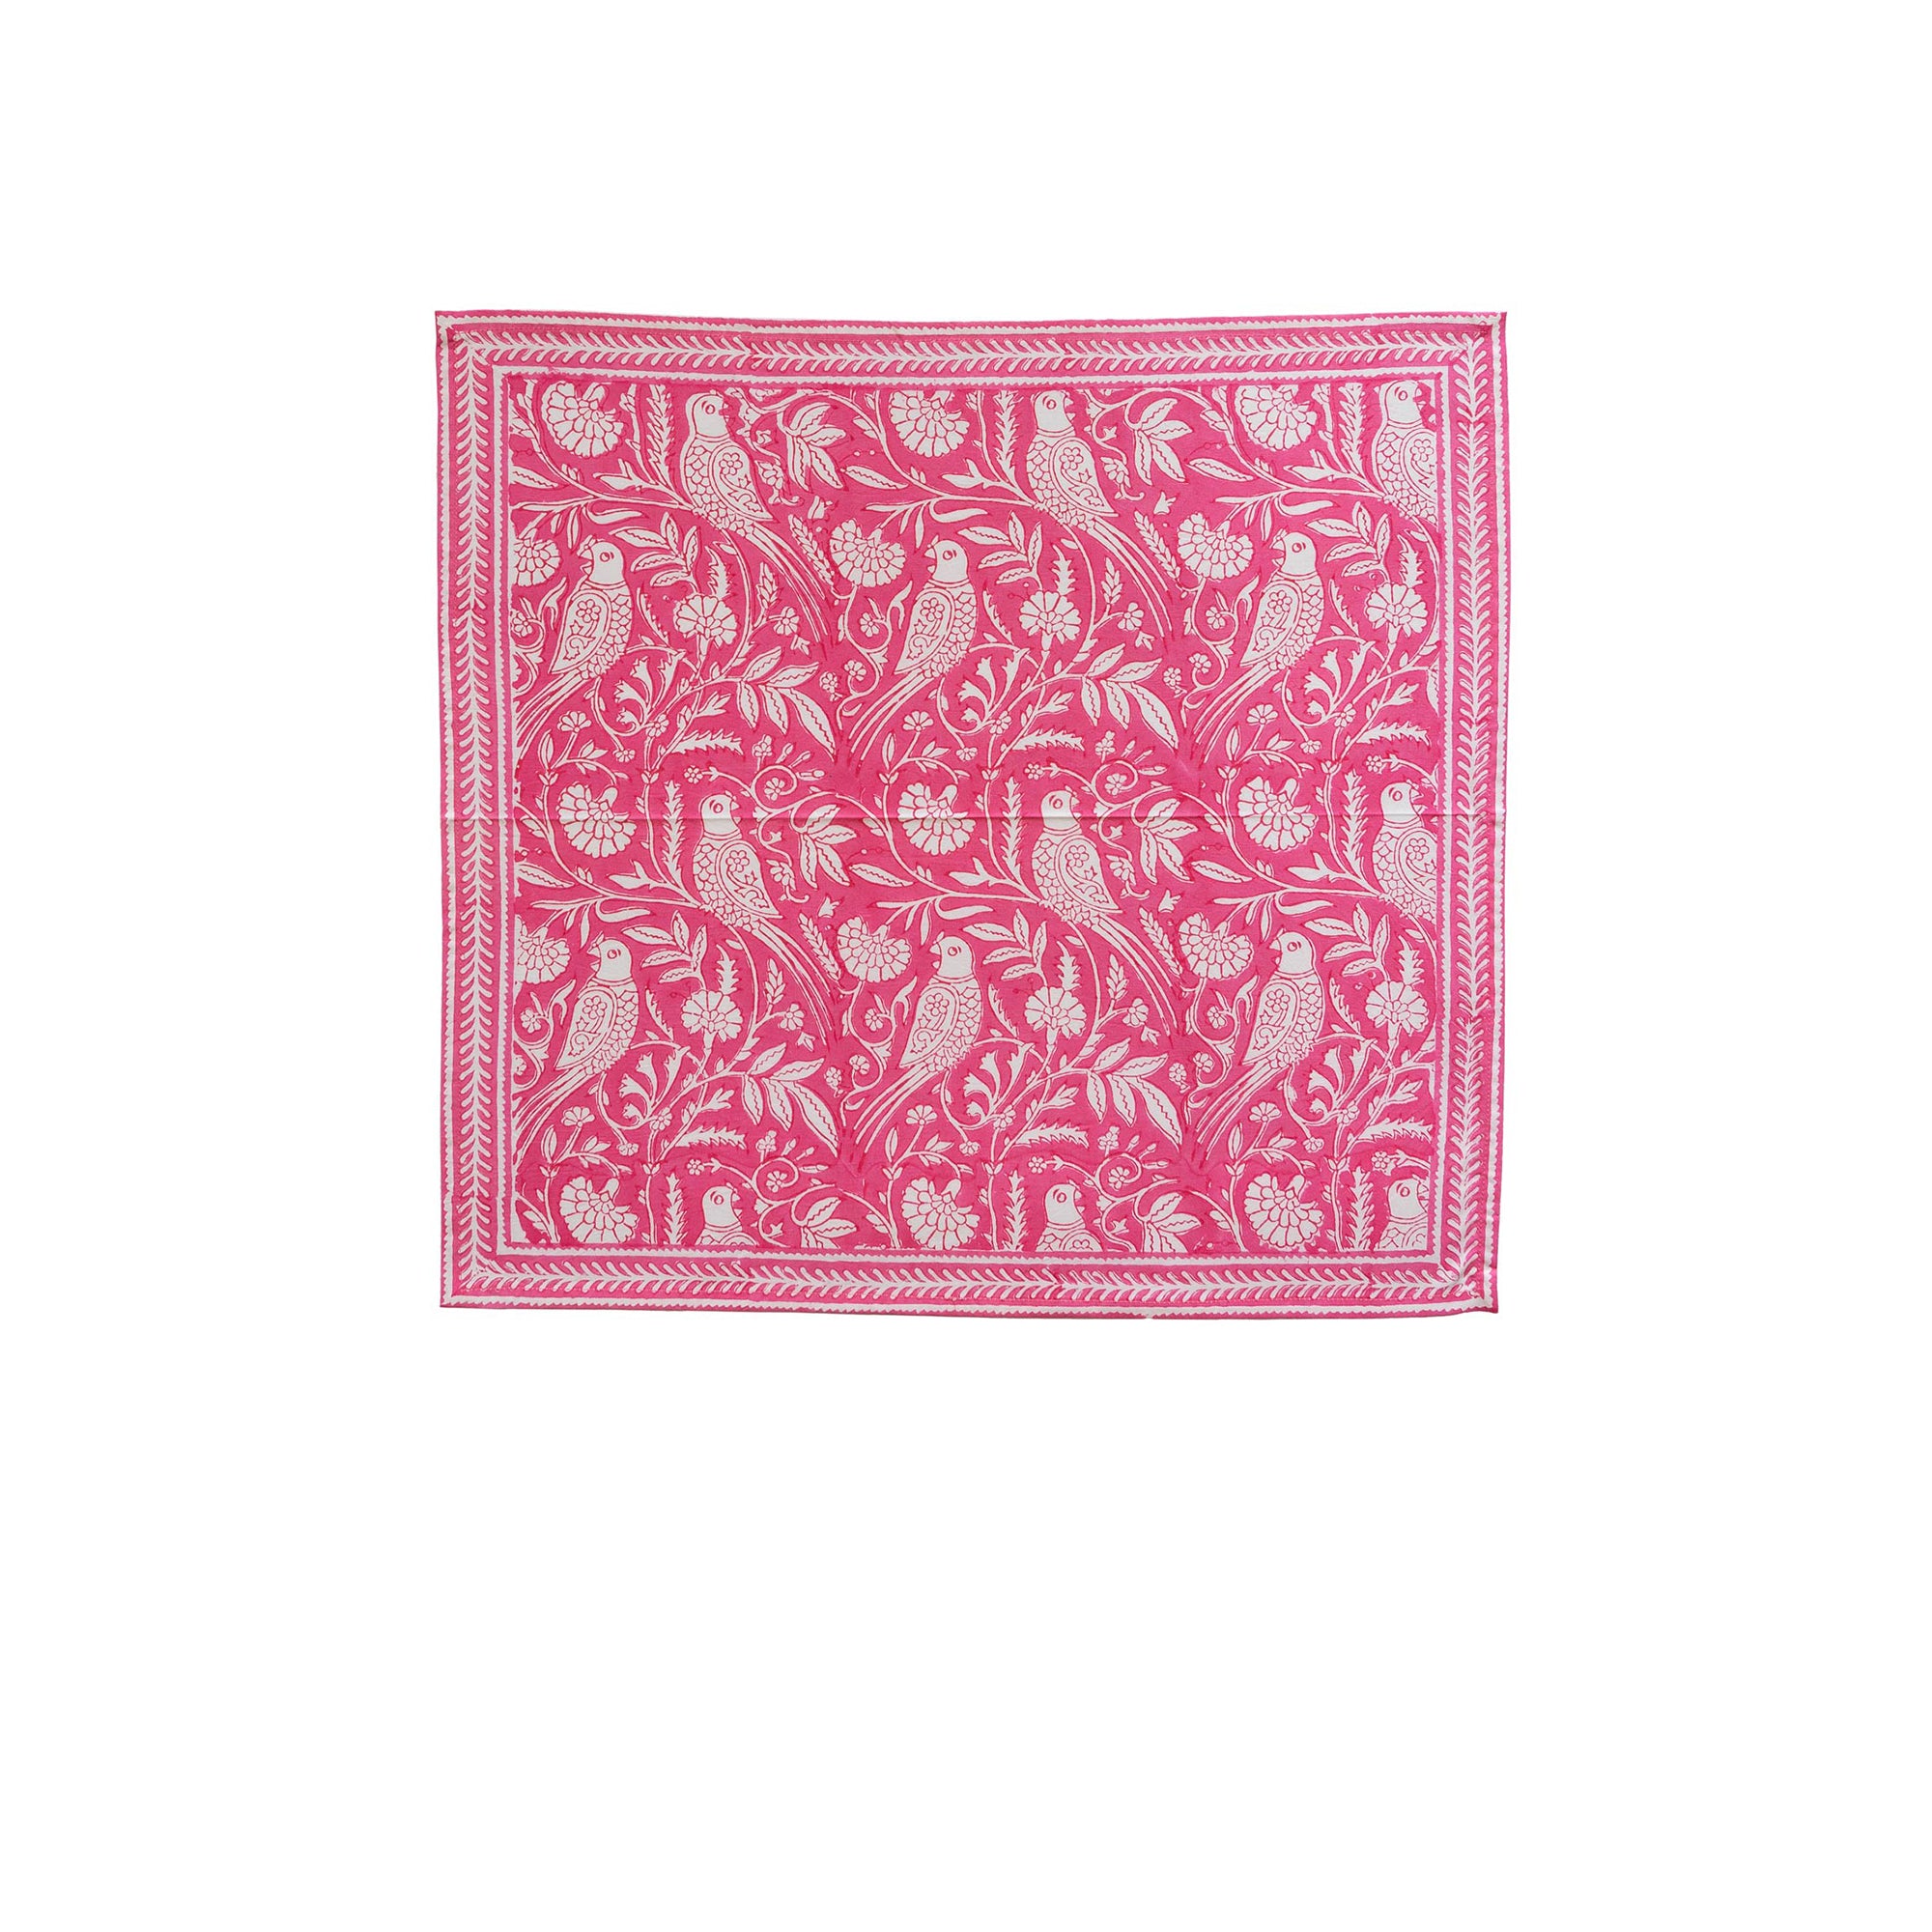 PARROT NAPKIN IN PINK  (SET OF 4)